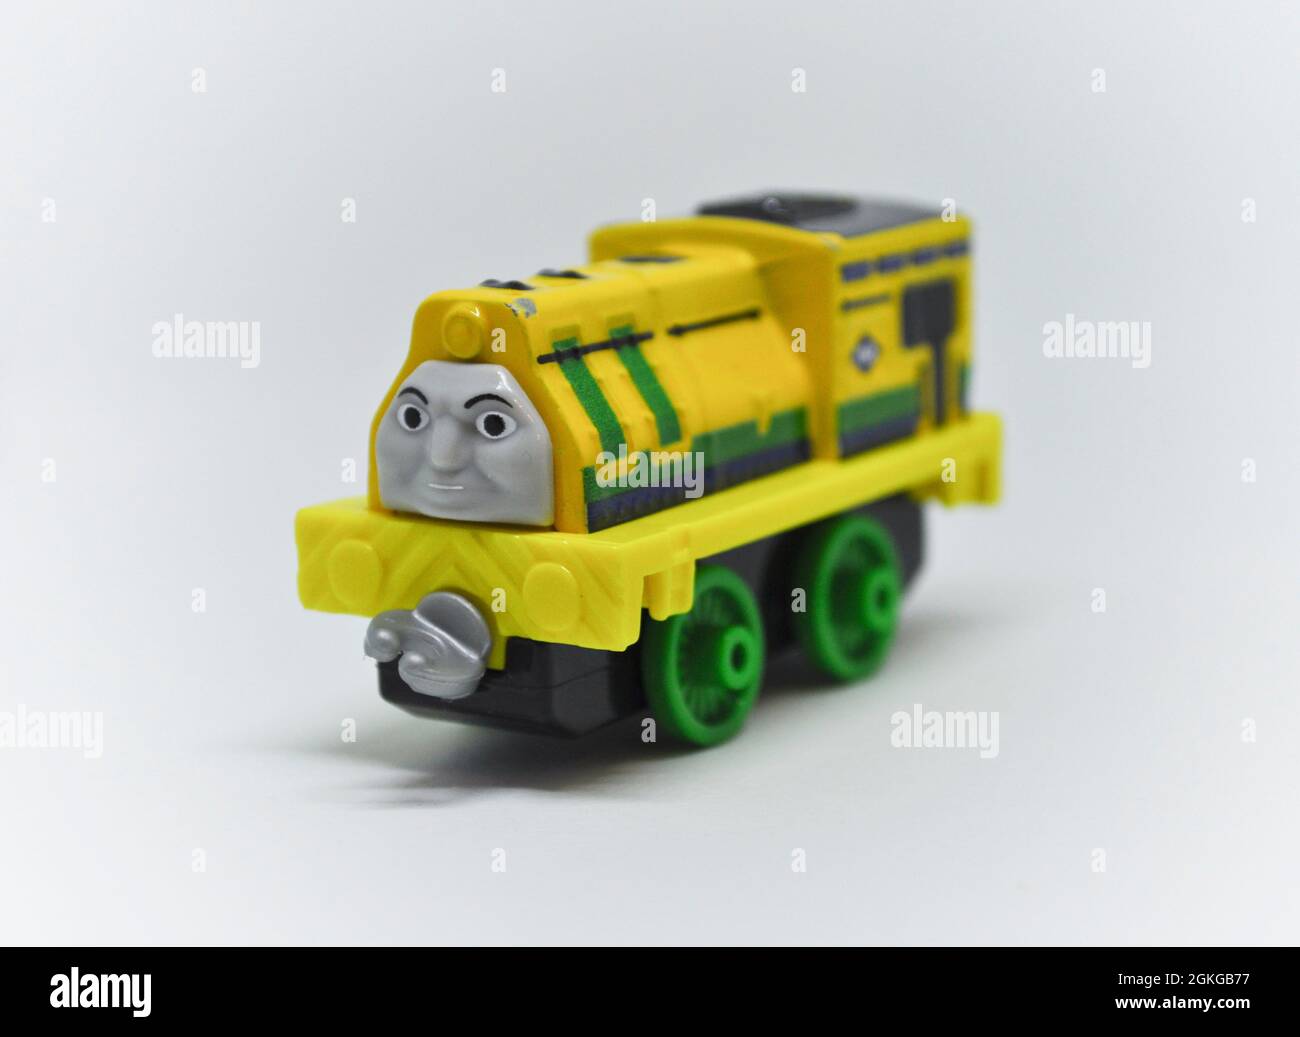 Raul - Thomas and Friends die cast character set against a white background. Stock Photo